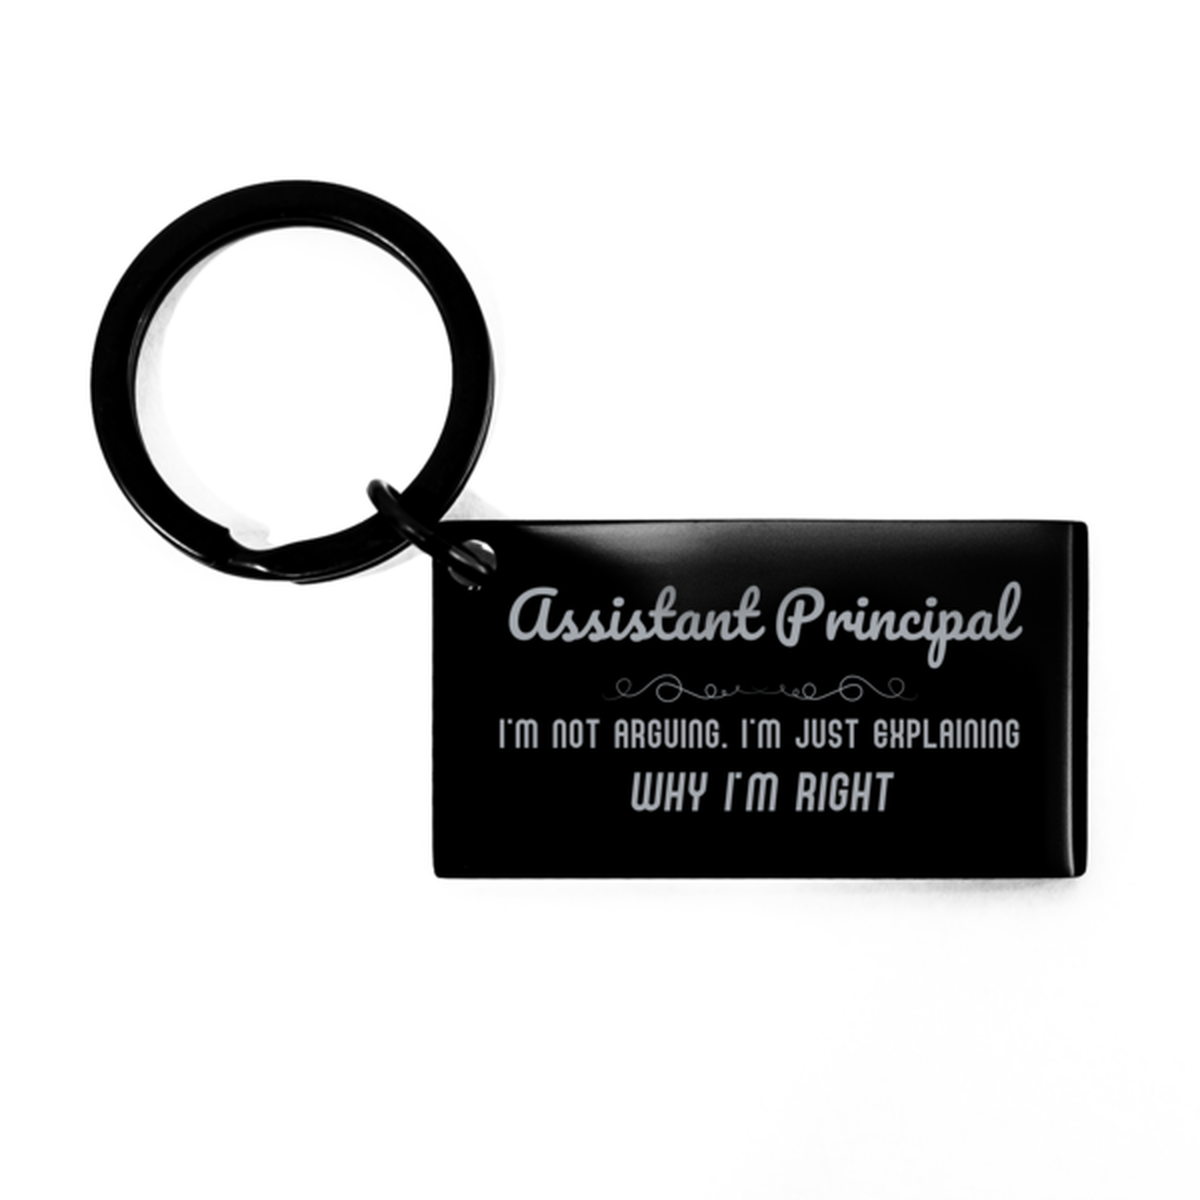 Assistant Principal I'm not Arguing. I'm Just Explaining Why I'm RIGHT Keychain, Funny Saying Quote Assistant Principal Gifts For Assistant Principal Graduation Birthday Christmas Gifts for Men Women Coworker